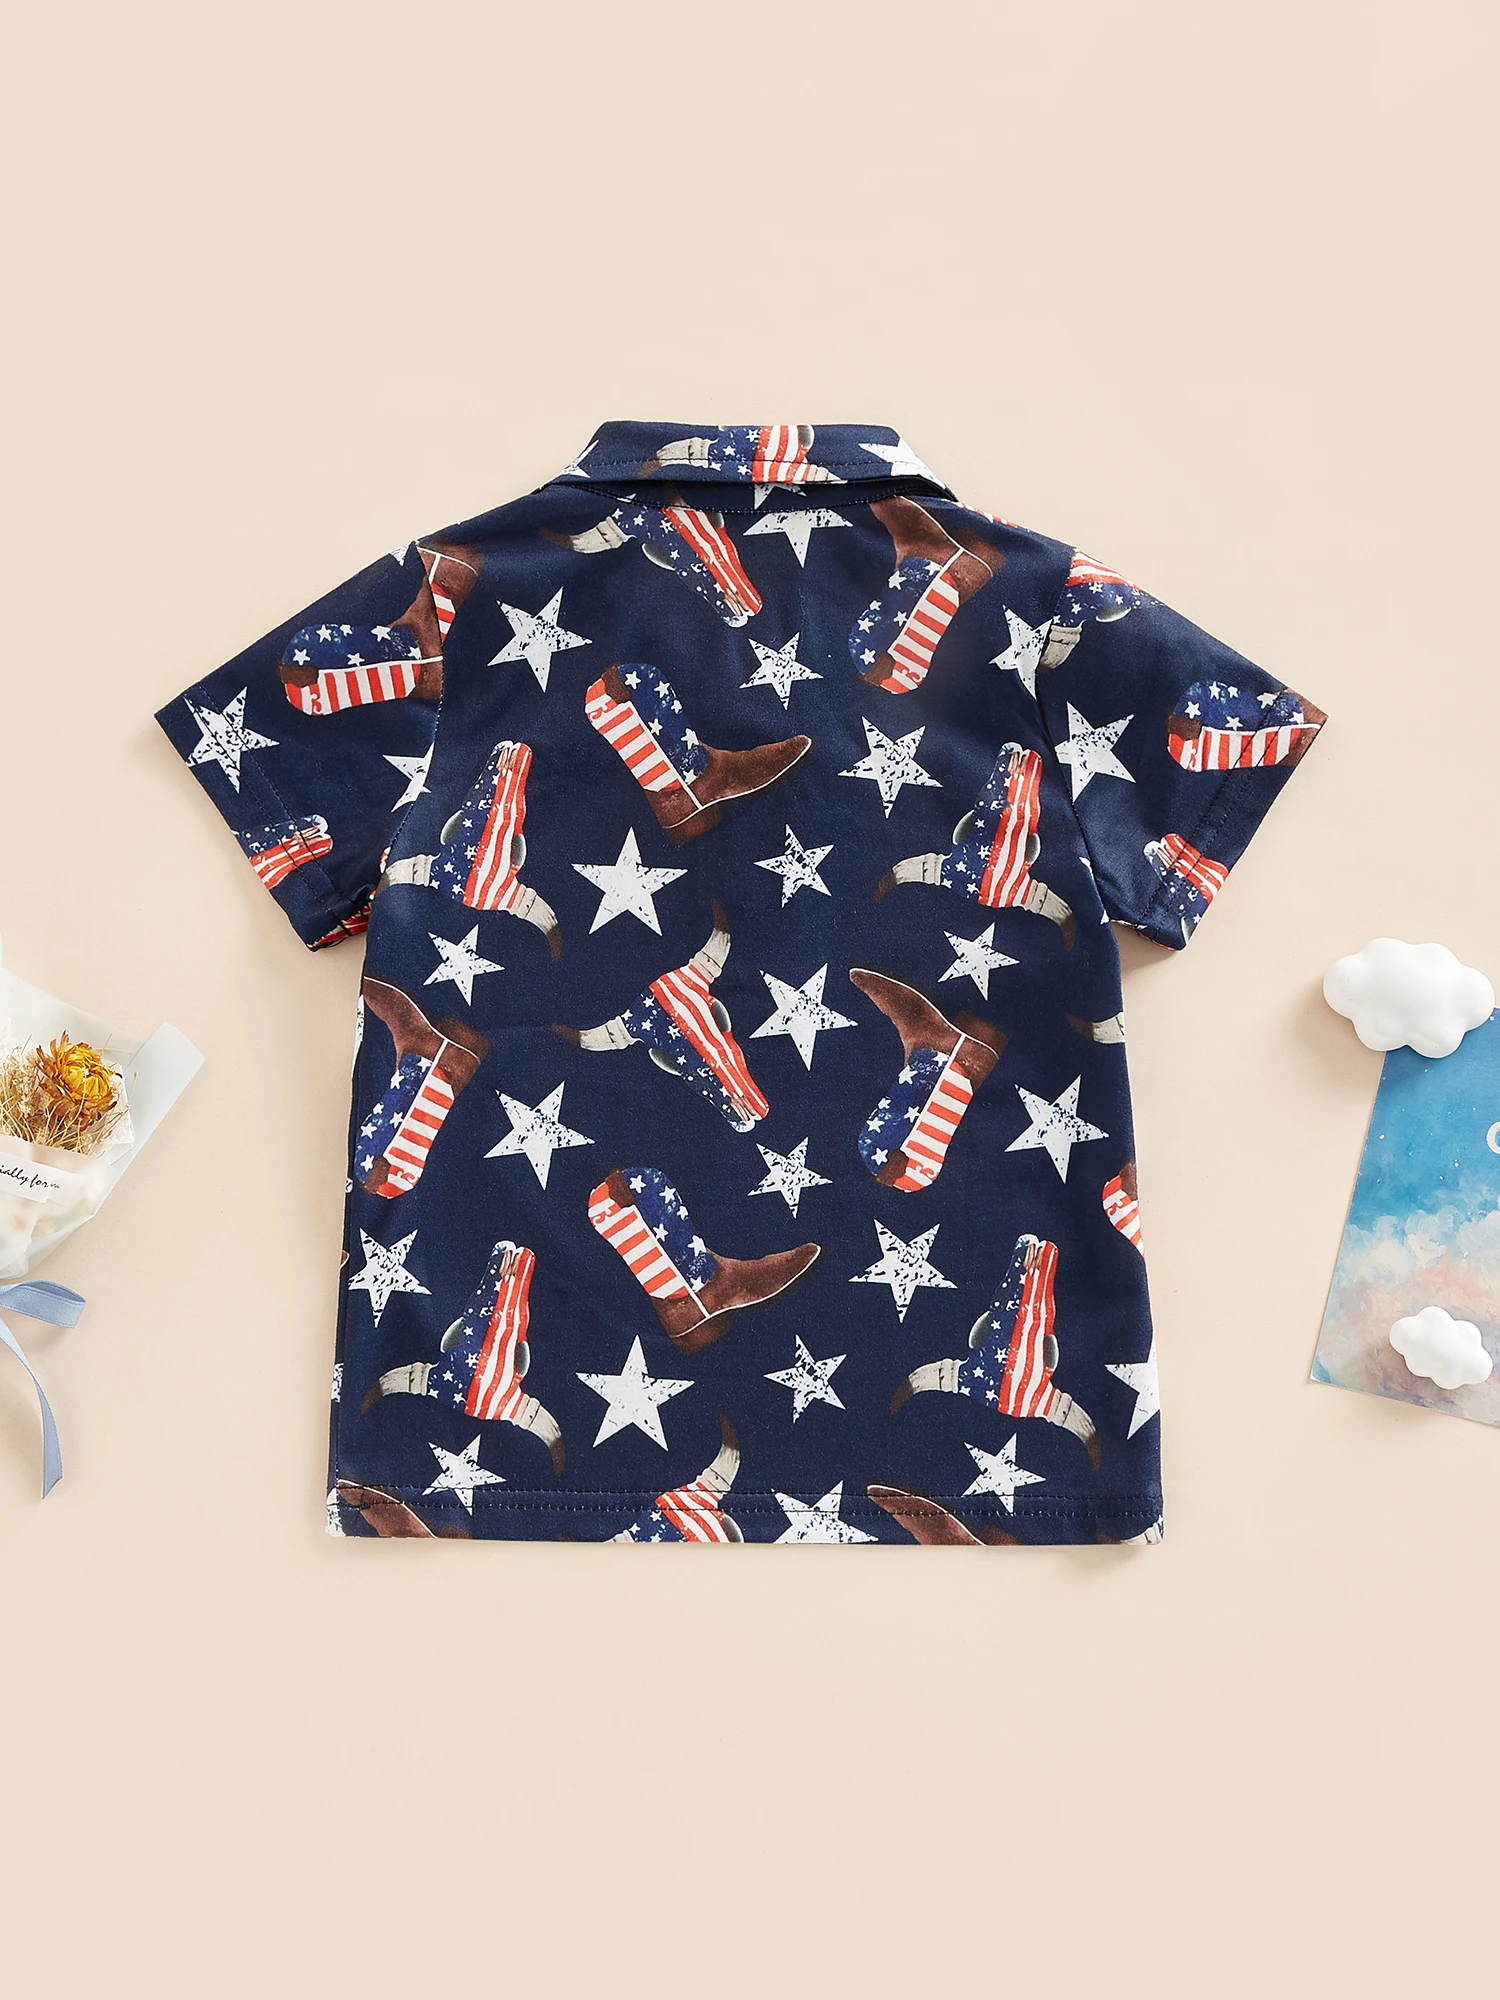 

4th of July Baby Boy Outfit Toddlers Dress Shirts Lapel Button Country Western Cowboy Memorial Day Patriotic Tee Top (C 1-2